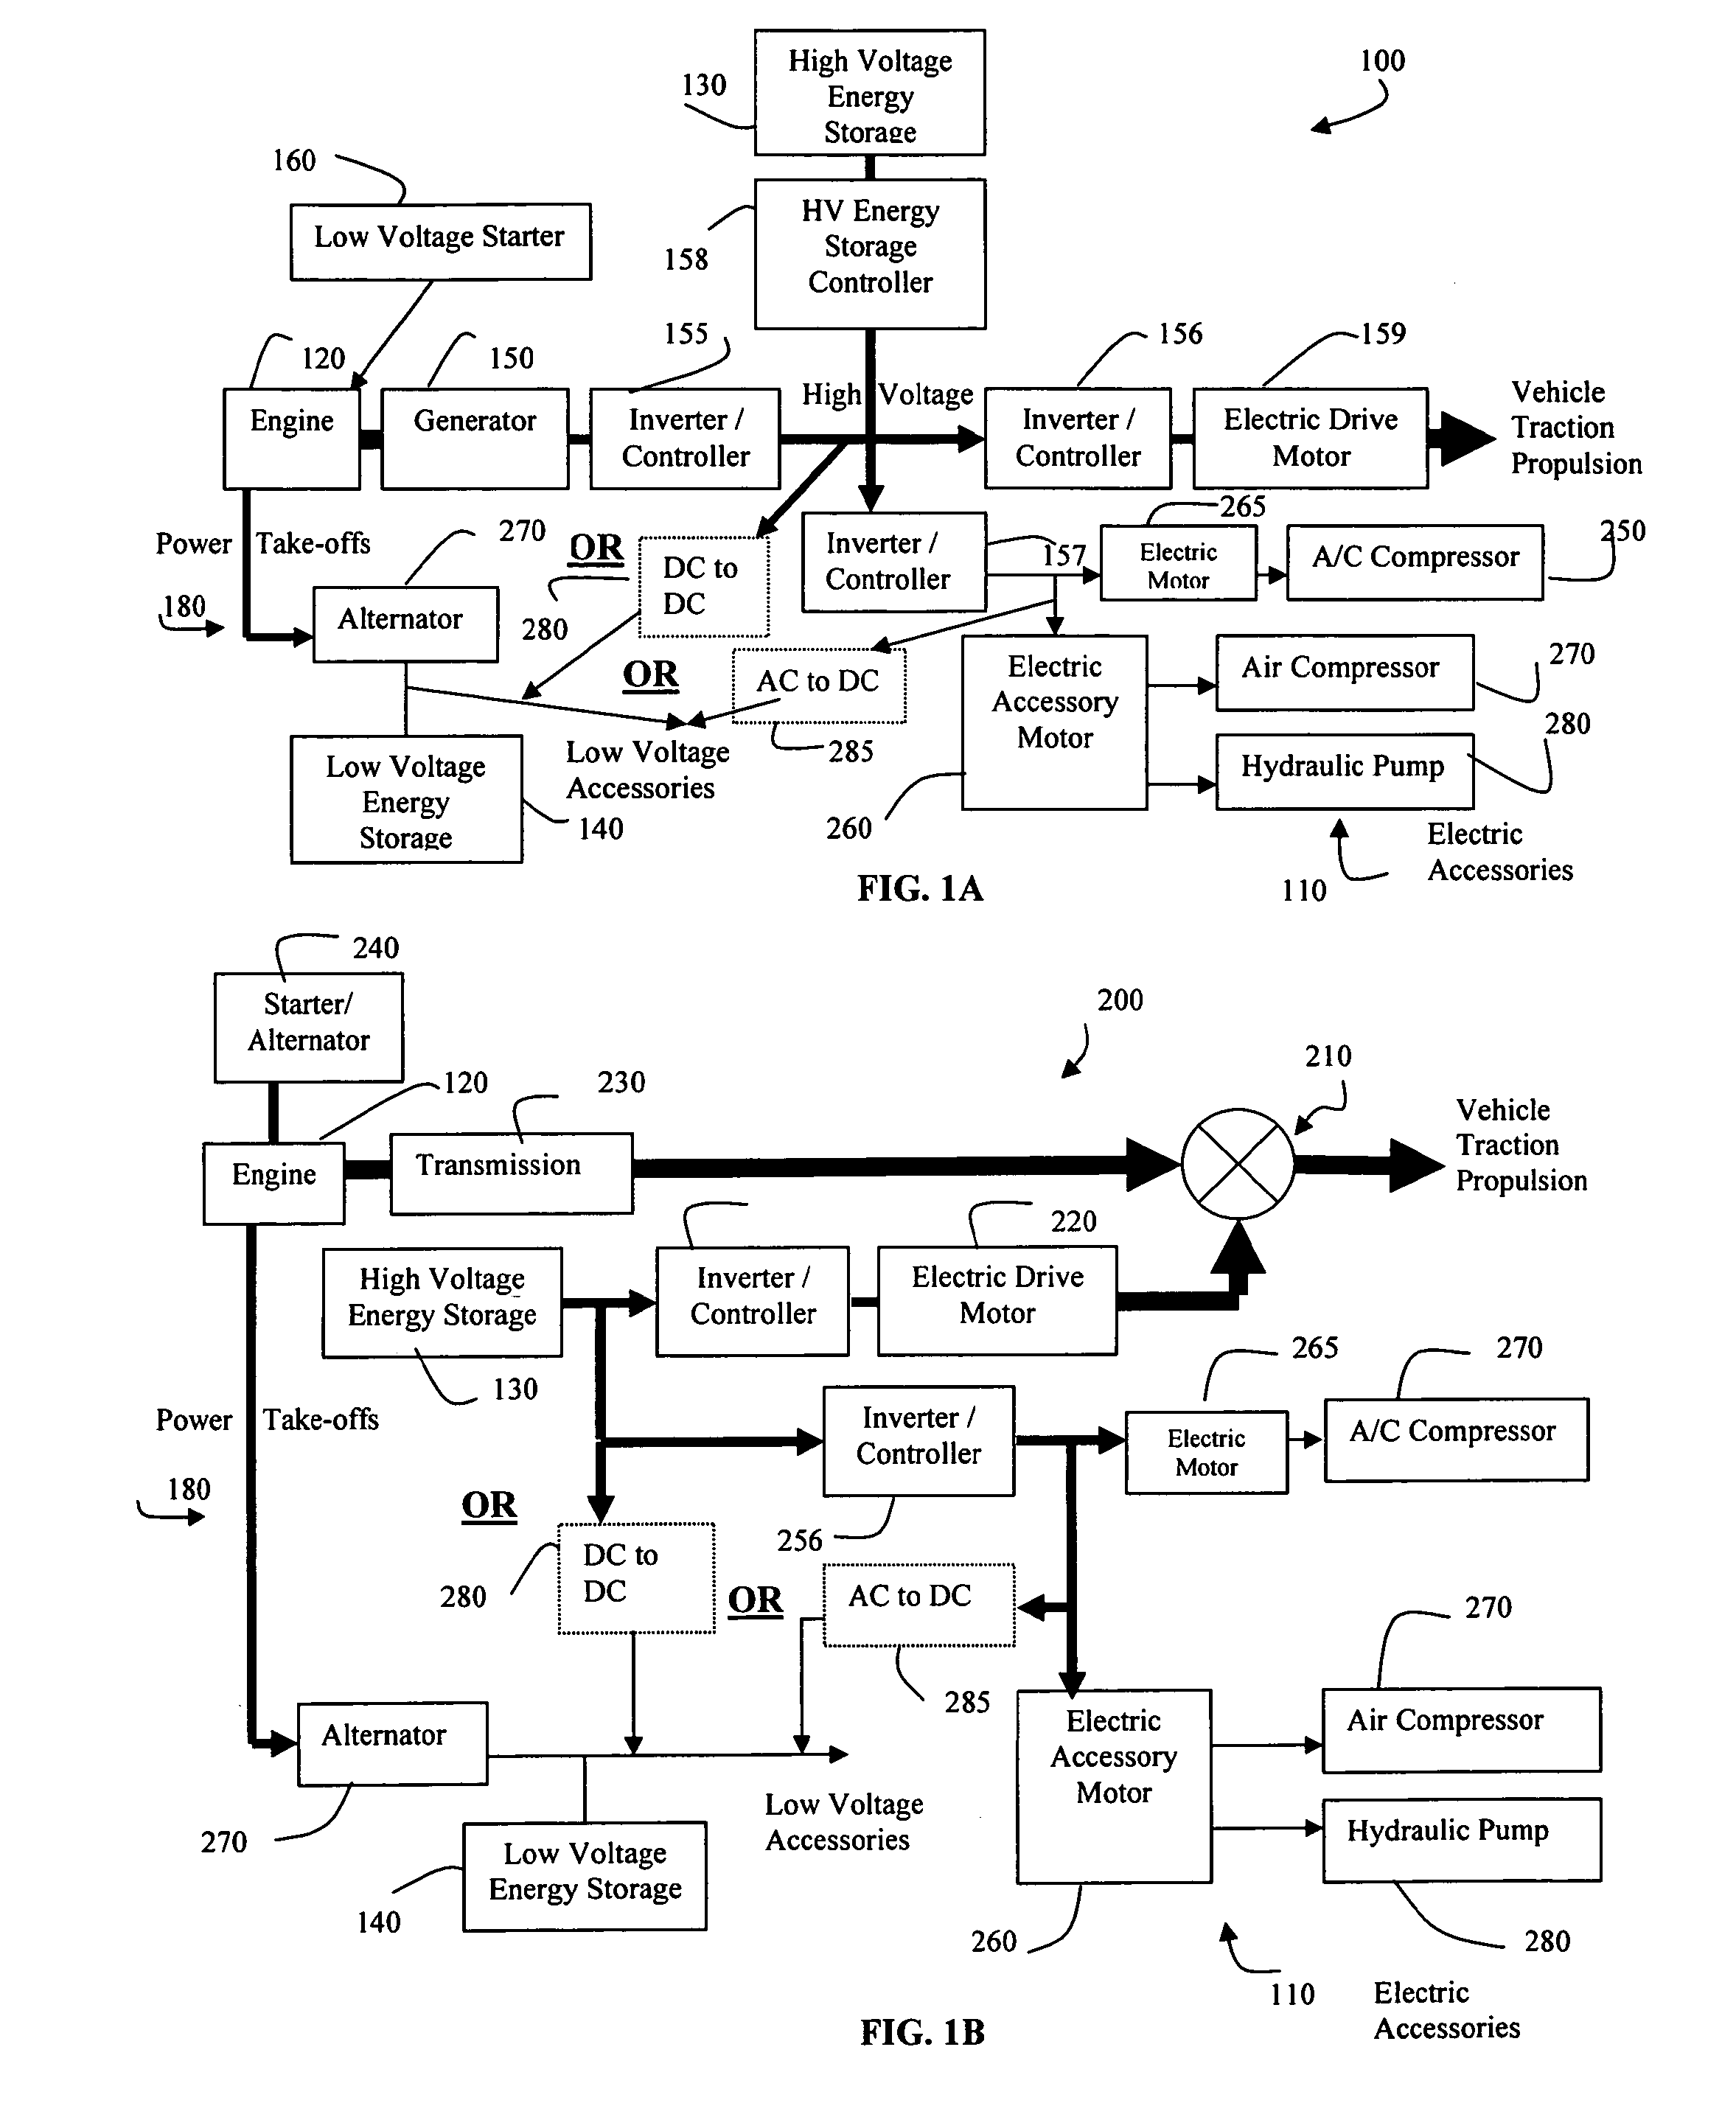 Method of Controlling Engine Stop-Start Operation for Heavy-Duty Hybrid-Electric Vehicles